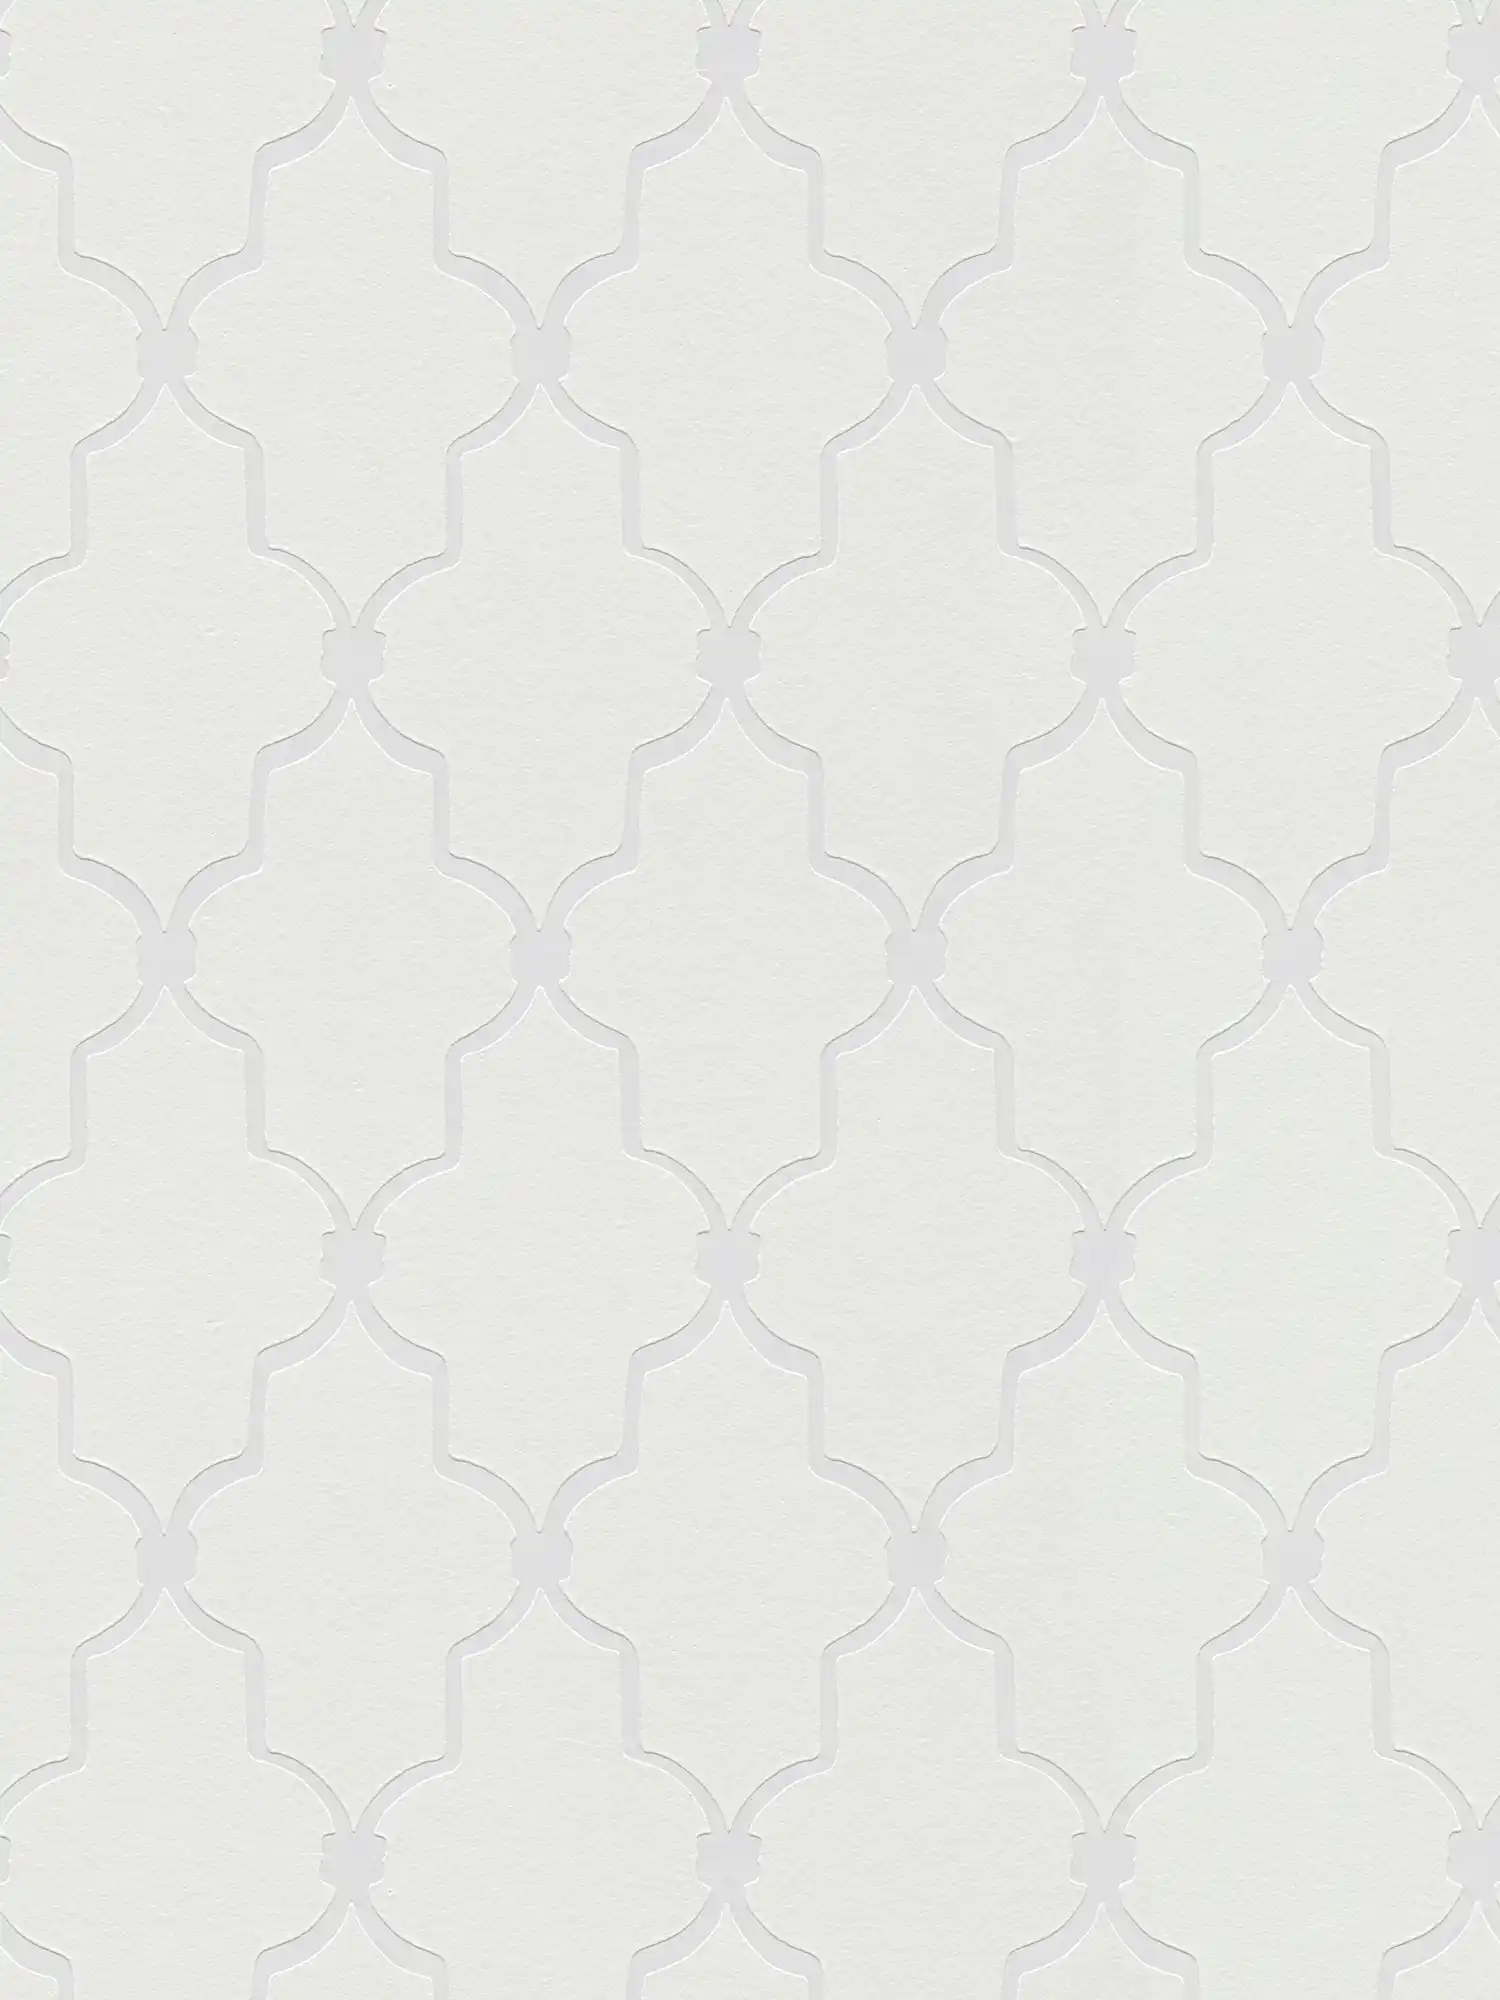 Paintable wallpaper with tile pattern - Paintable
